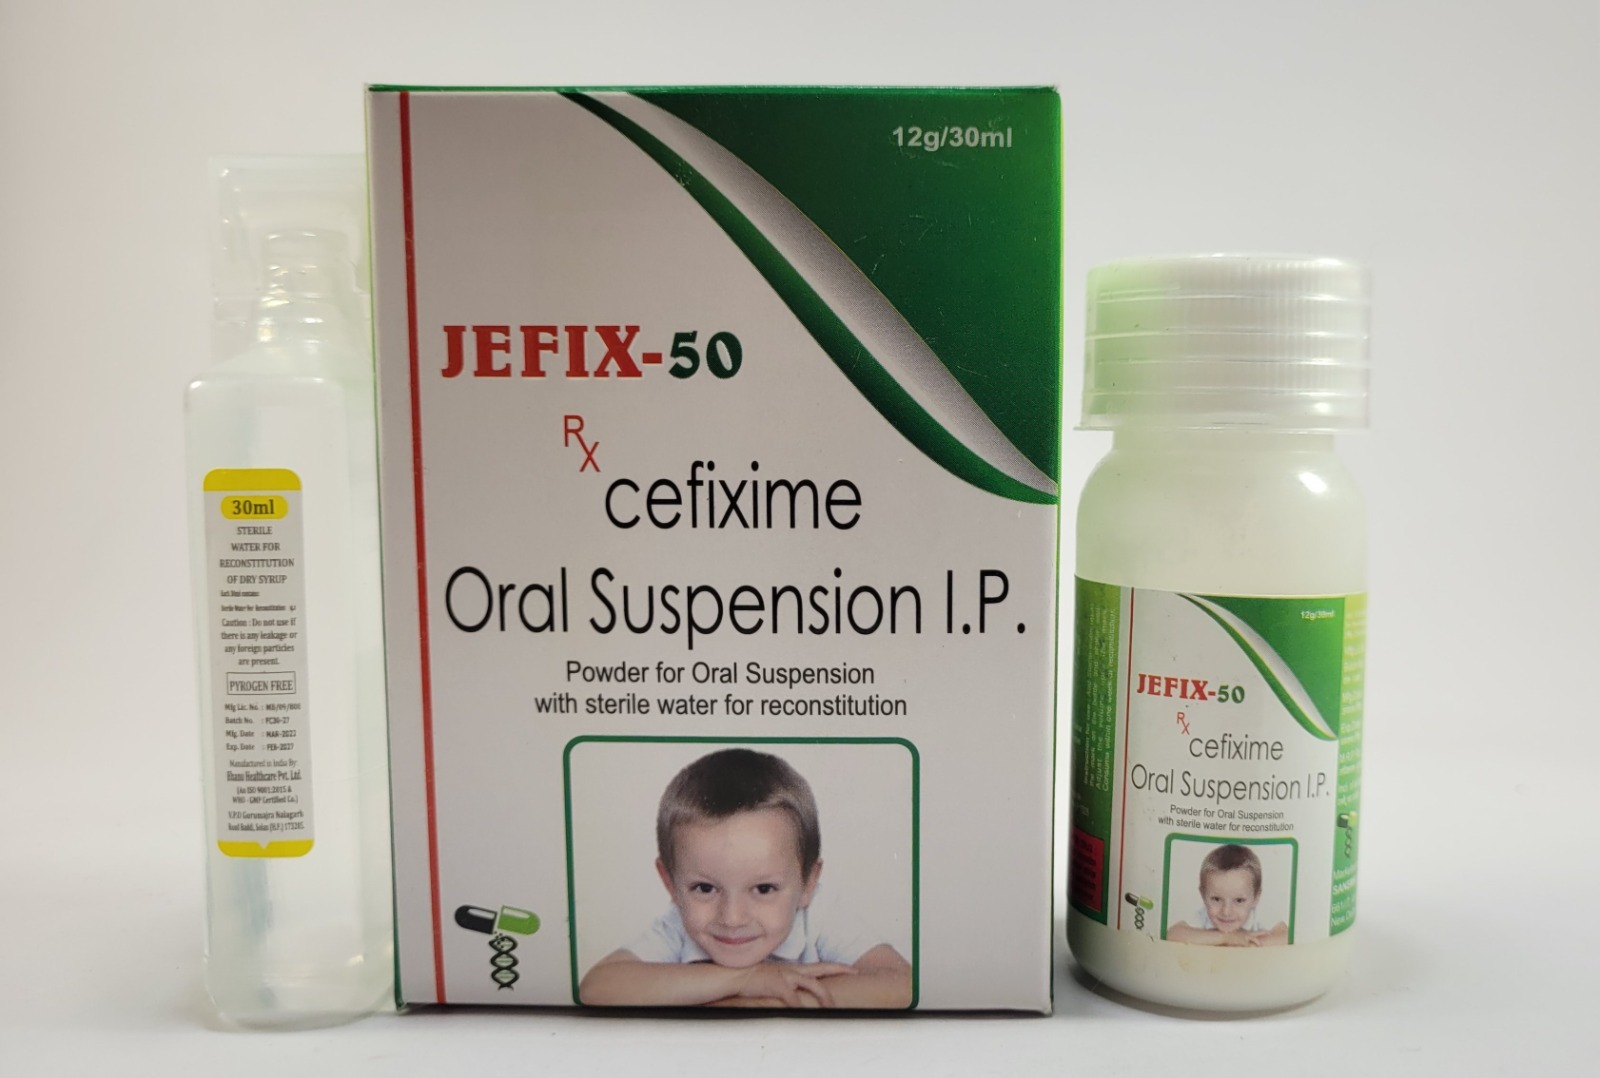 50 mg Cefixime for Oral Suspension